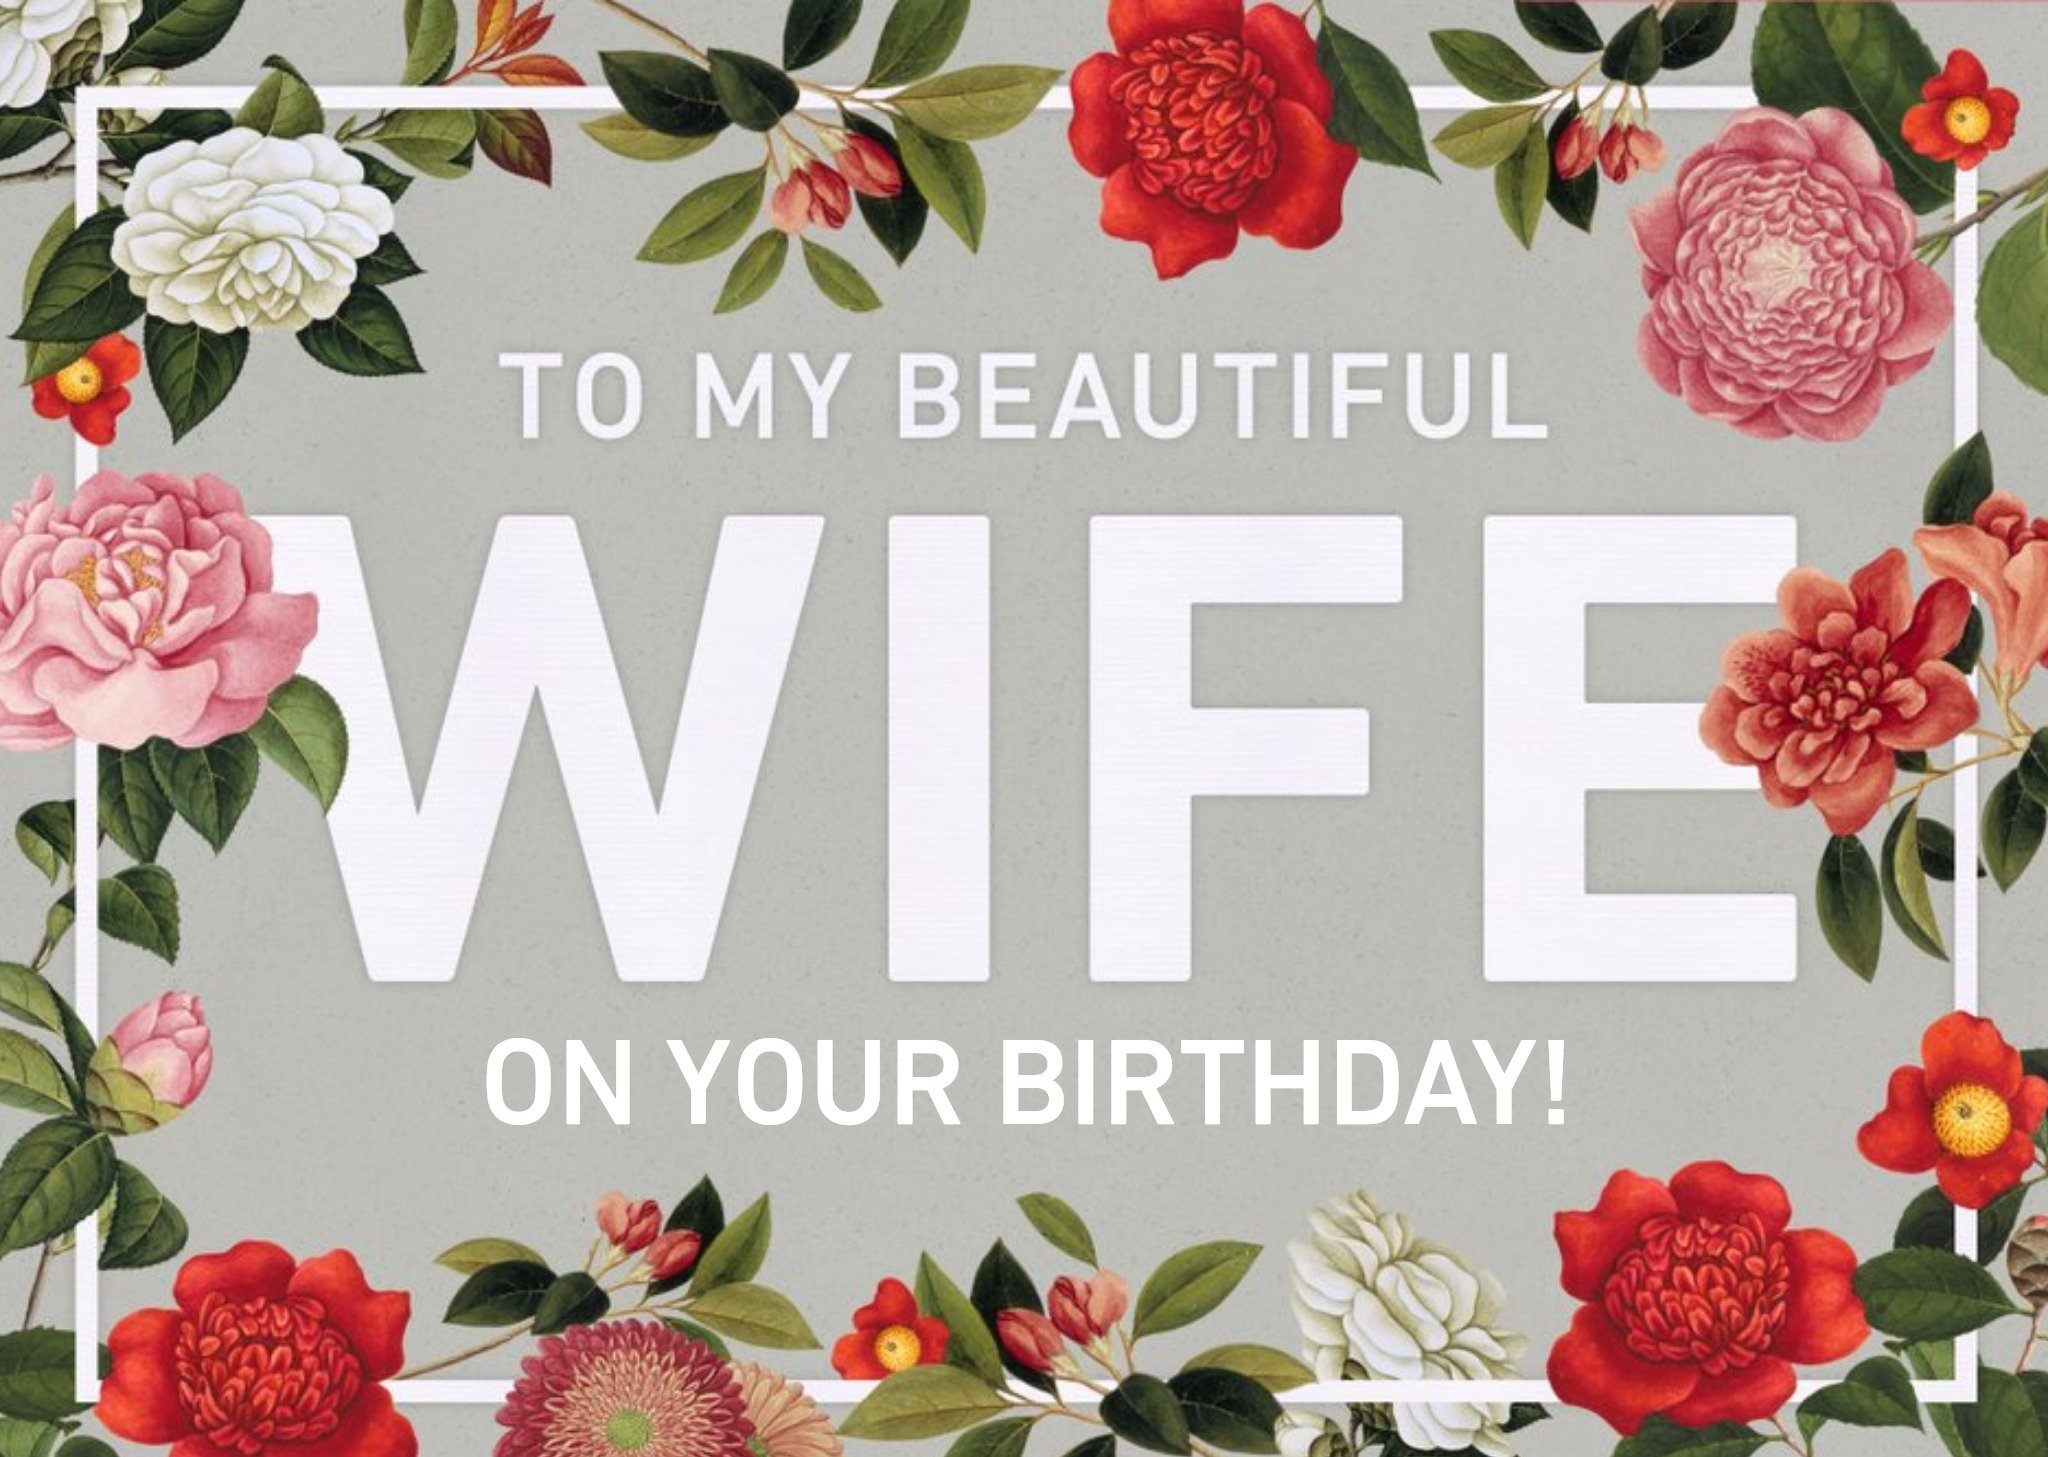 The Natural History Museum Beautiful Wife Pink Flower Grey Birthday Card, Large